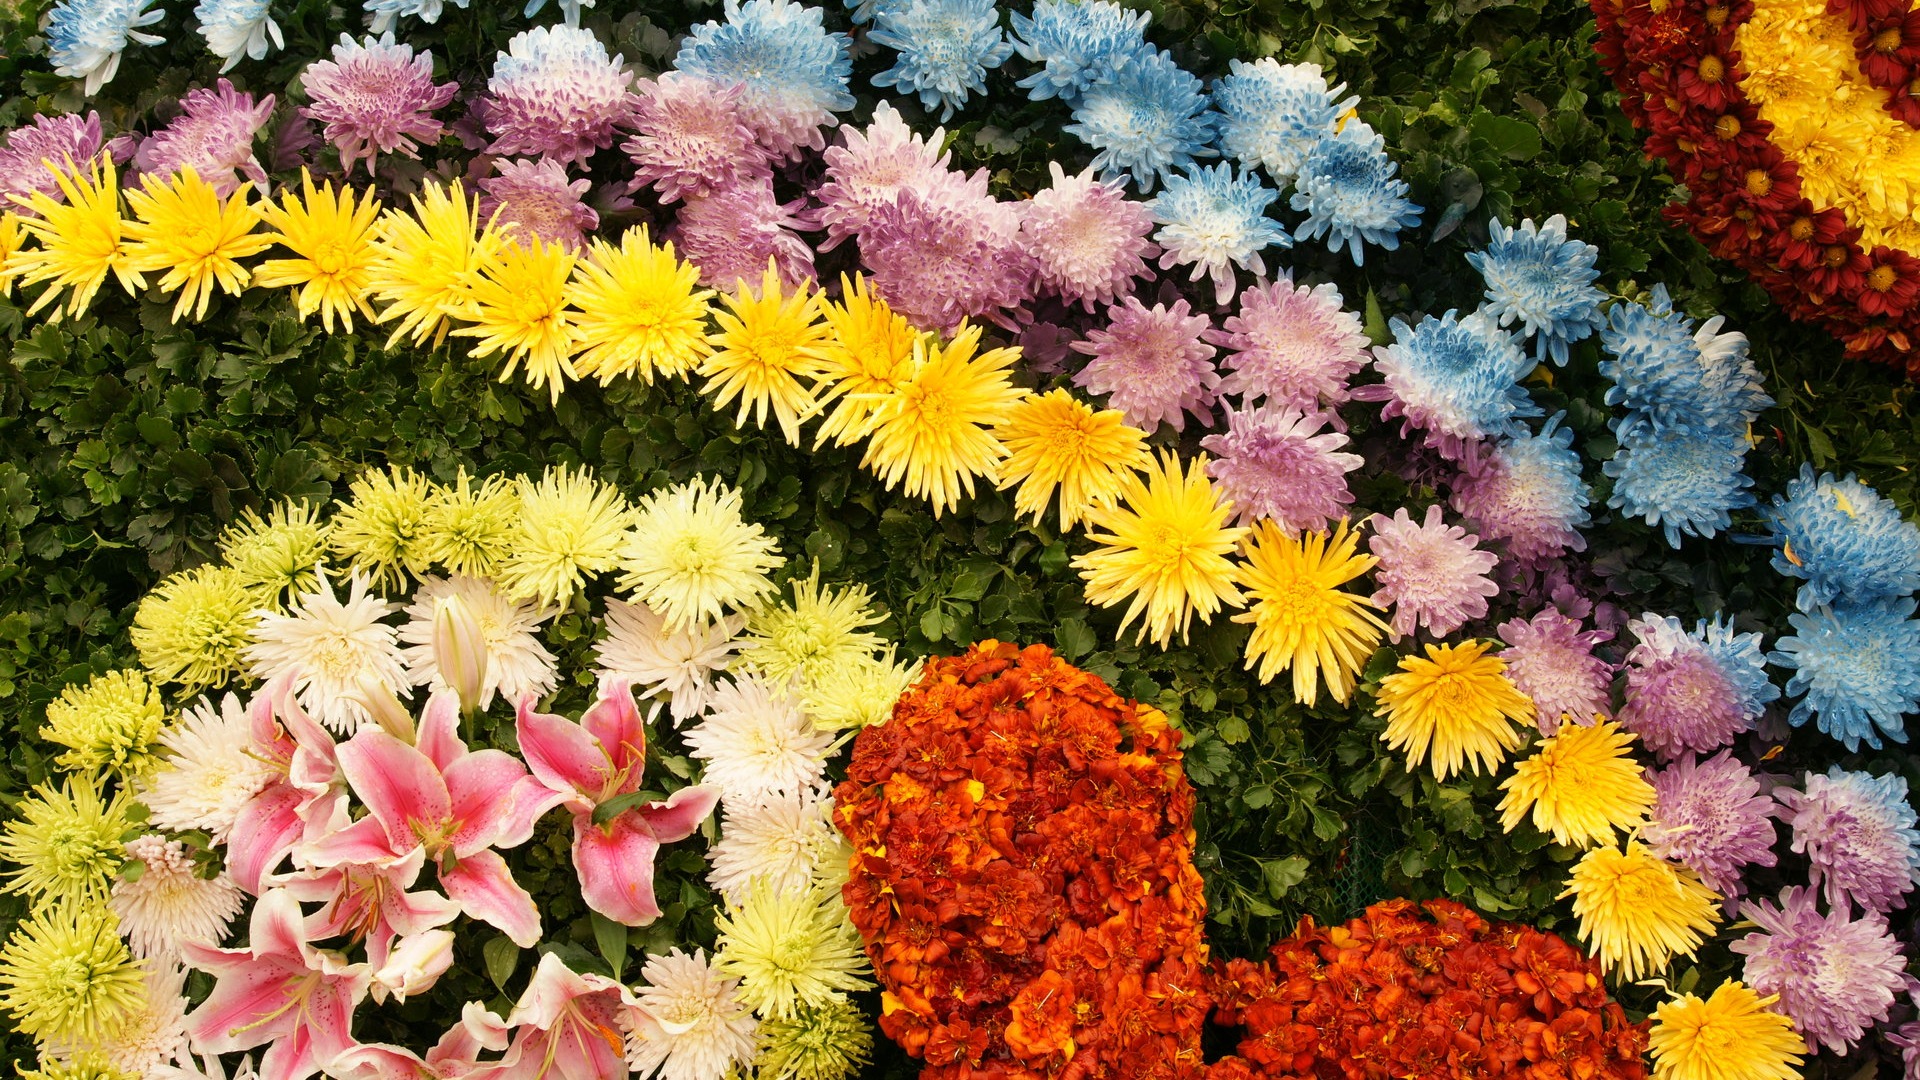 Colorful flowers decorate wallpaper (4) #1 - 1920x1080